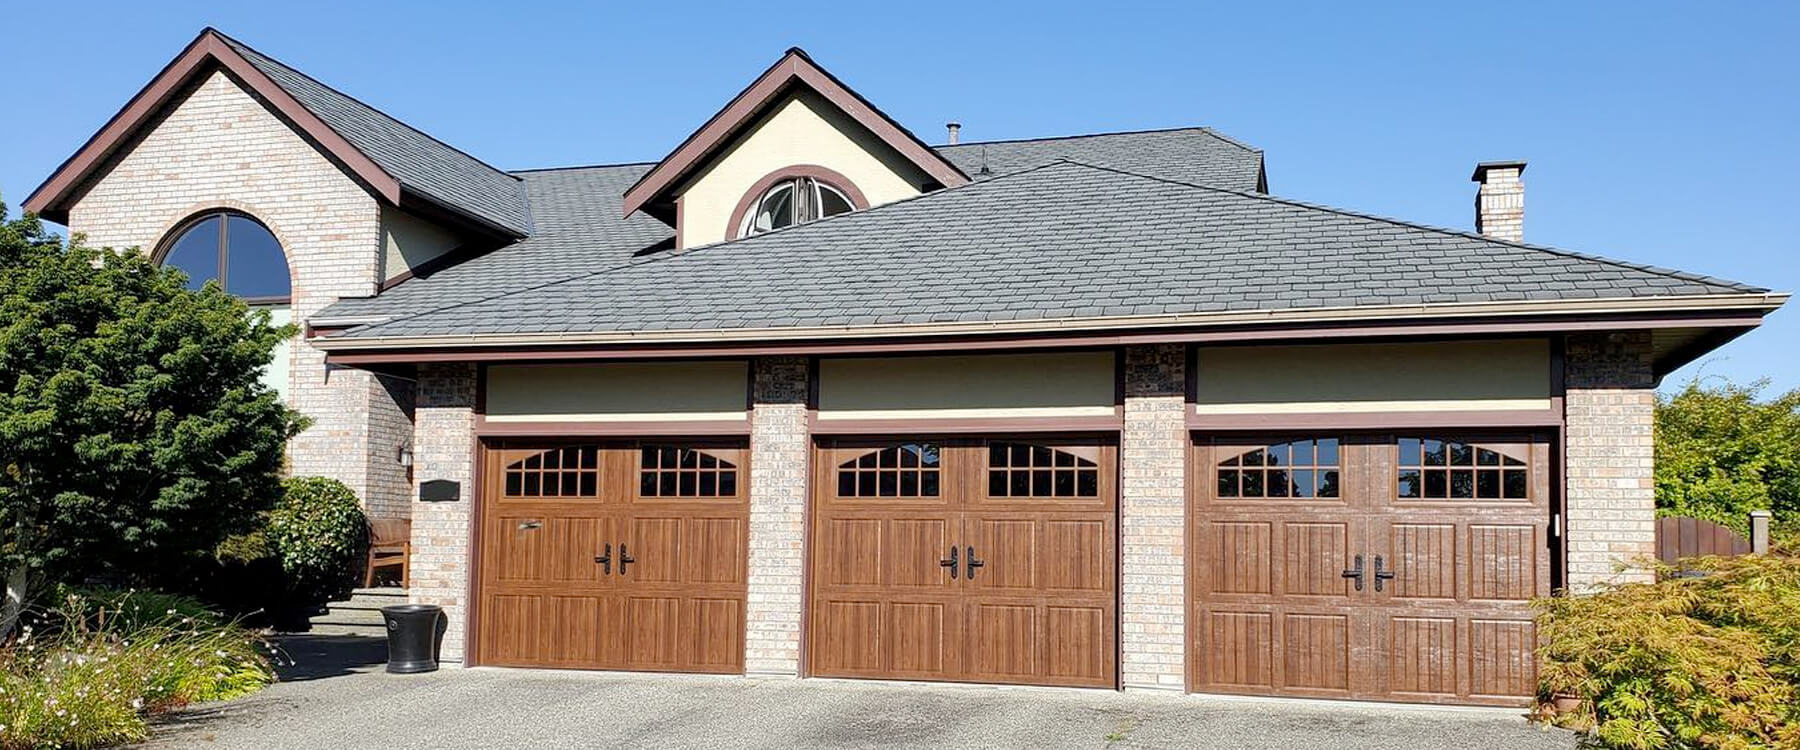 Choosing the Right Garage Door Size for Your New Home